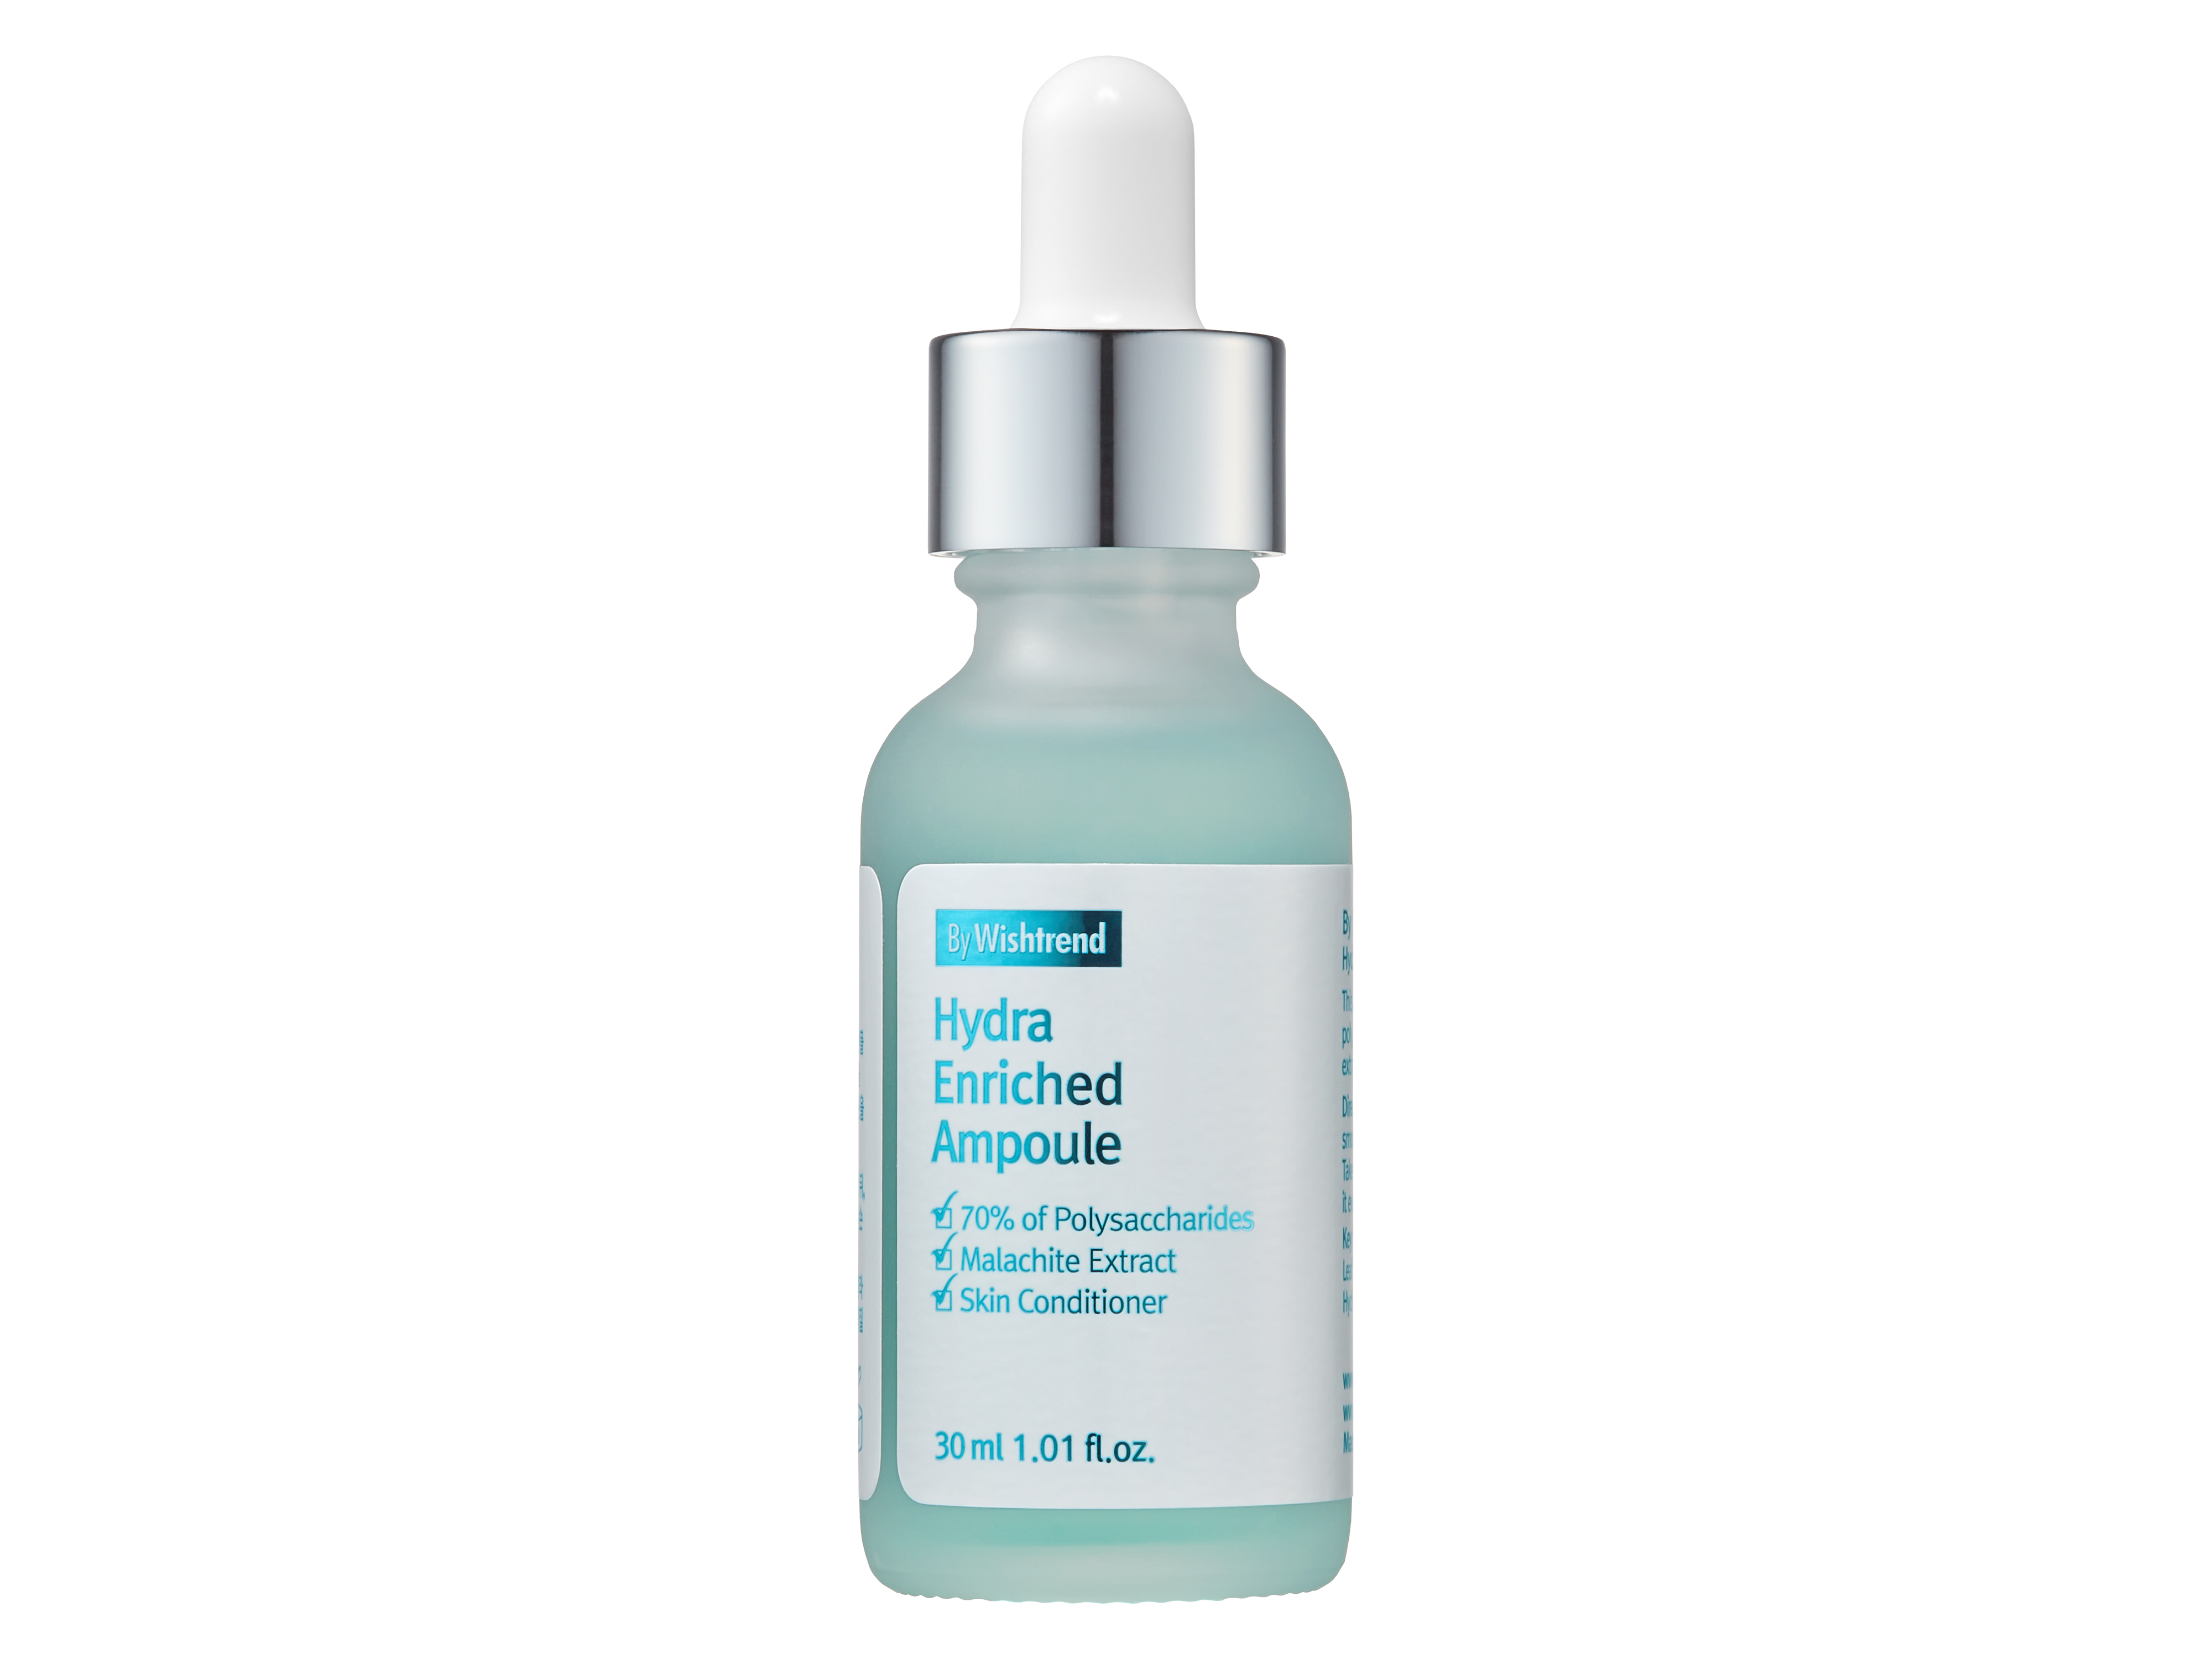 By Wishtrend Hydra Enriched Ampoule, 30 ml